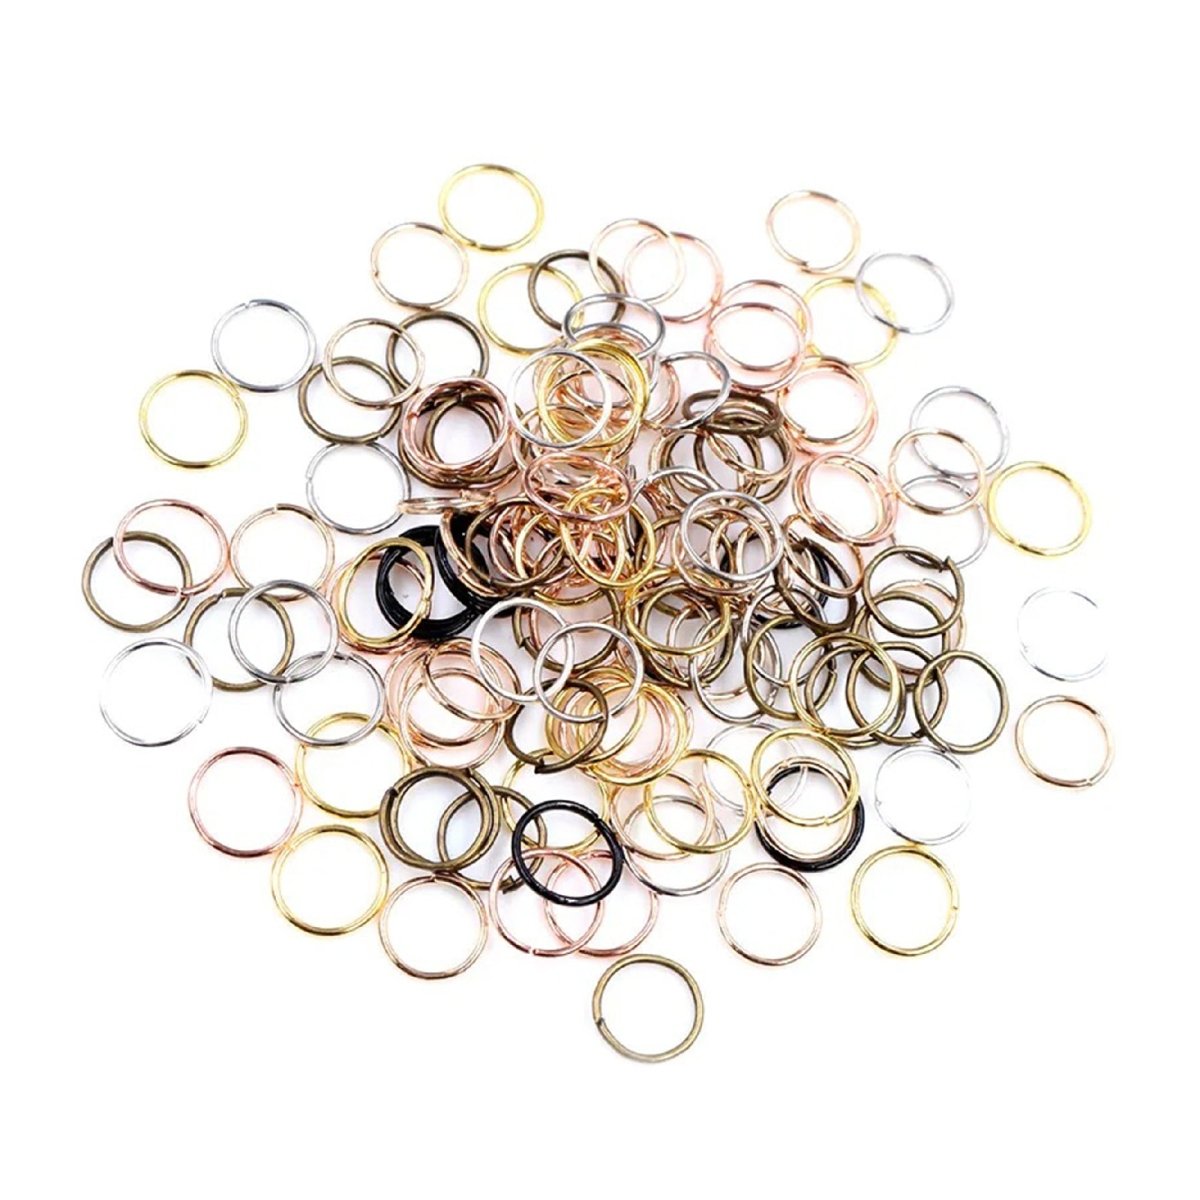 10pcs Jewellery Open Jump Rings 8mm-12mm Single Loop KC Gold Rhodium Light Silver Gold Key Rings Small Keyring - 8mm Mixed - - Asia Sell